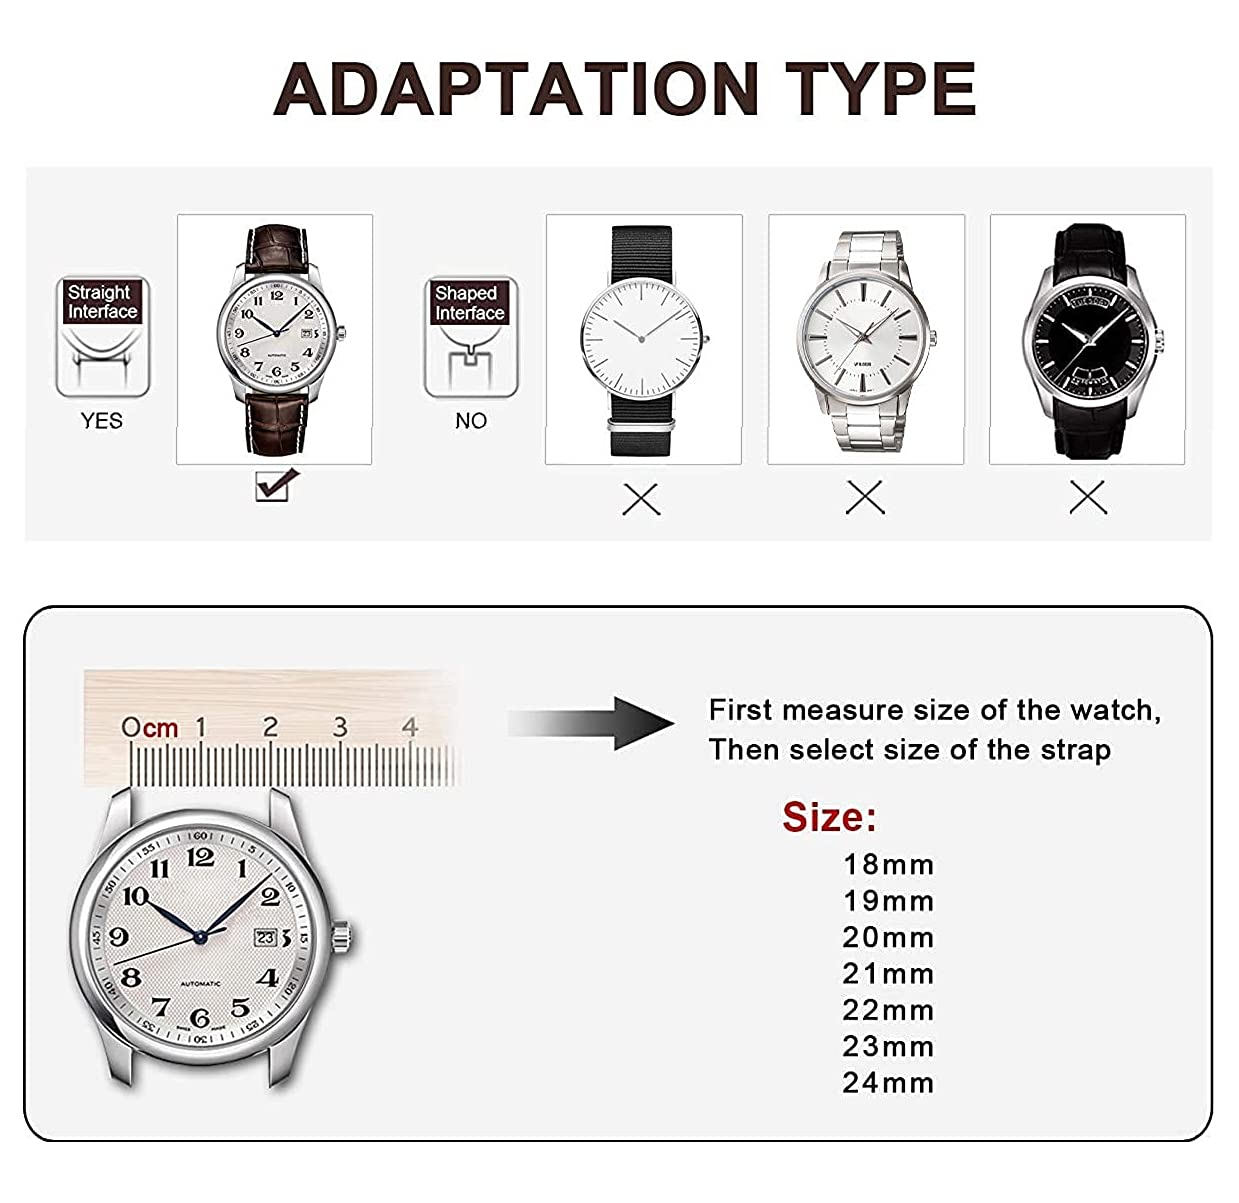 Nice Pies Premium Canvas Nylon Genuine Leather Strap Bracelet Double Press Butterfly Buckle Watch Band for Men's Sports Military Accessories 18/20/22/24mm